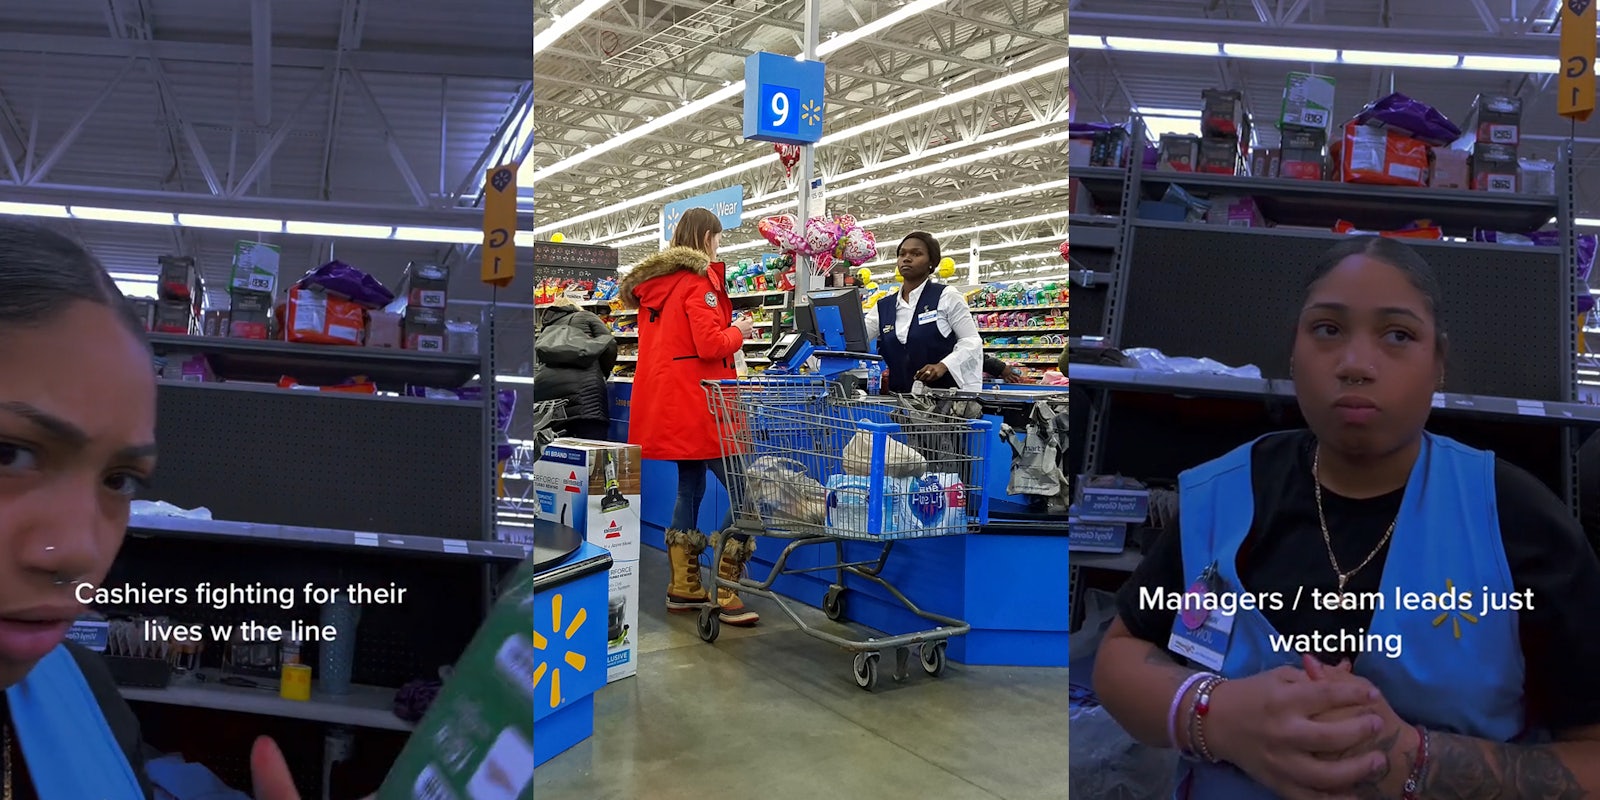 Walmart worker with caption 'Cashiers fighting for their lives w the line' (l) Walmart checkout (c) Walmart worker with caption 'Managers / team leads just watching' (r)